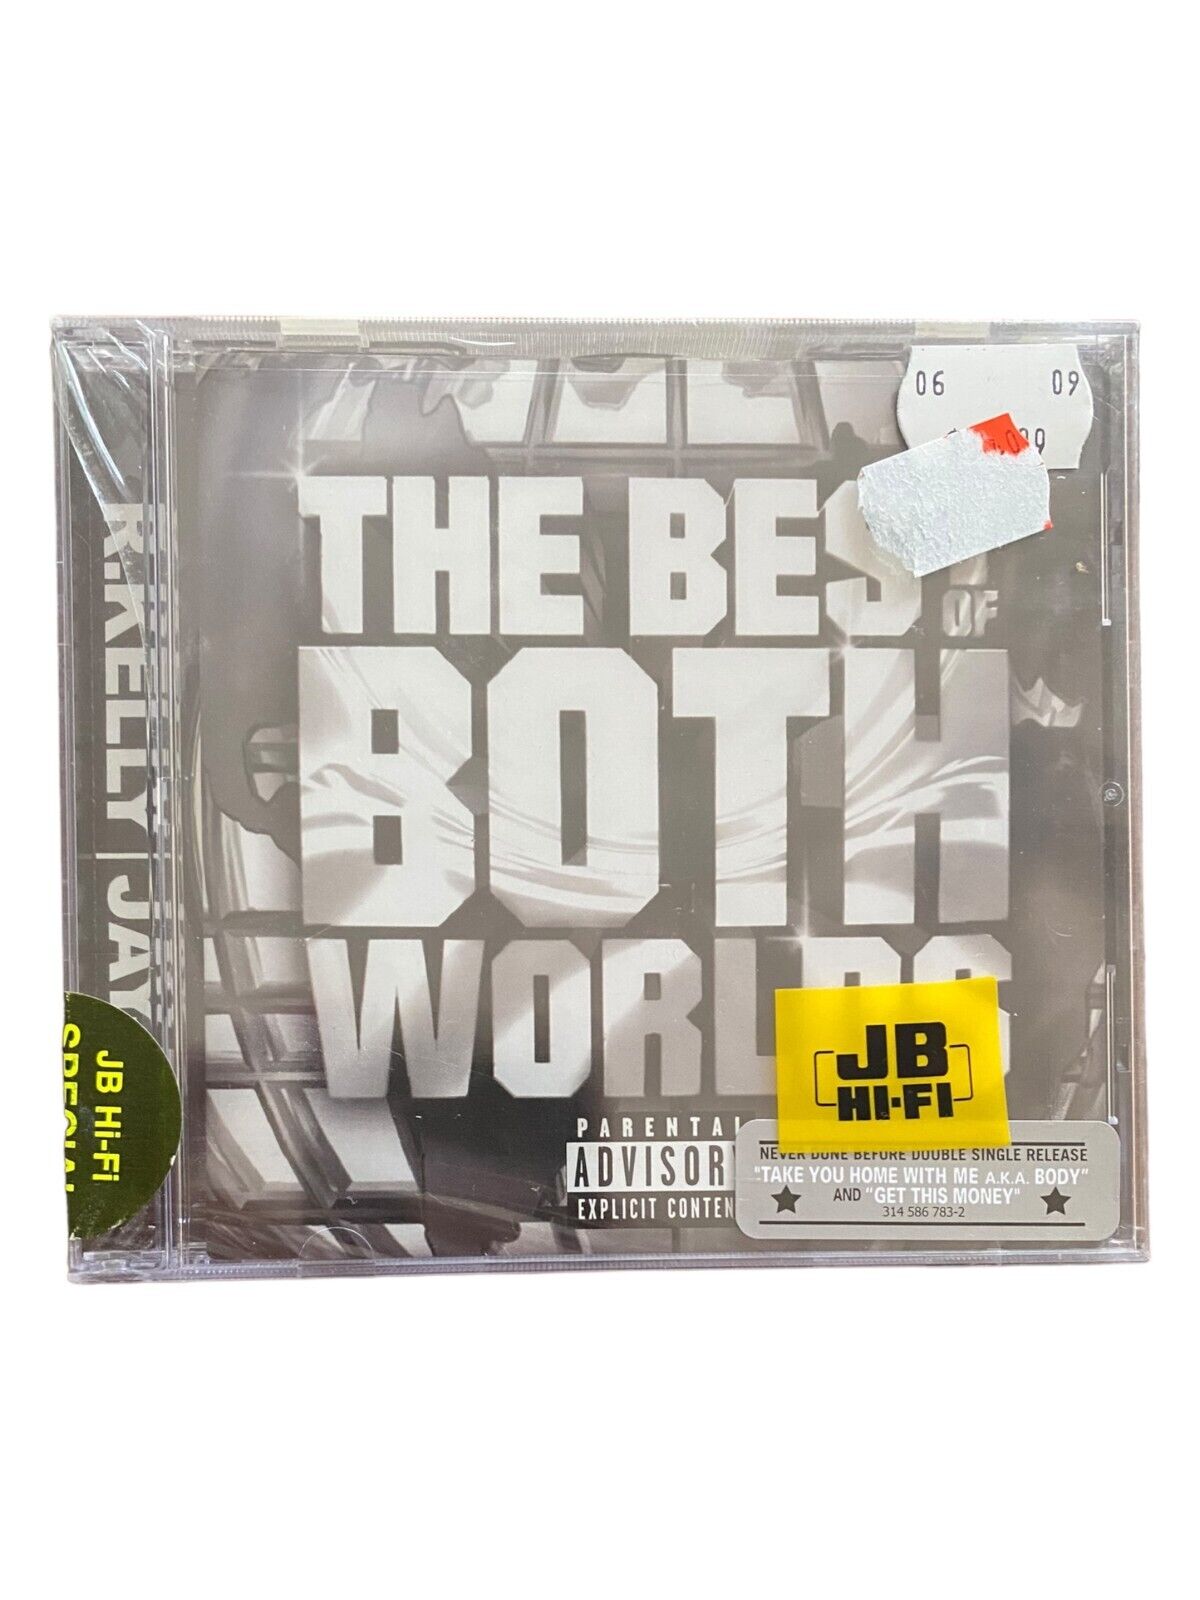 R. Kelly/Jay-Z - The Best of Both Worlds CD Collab Album 2002 New and Sealed